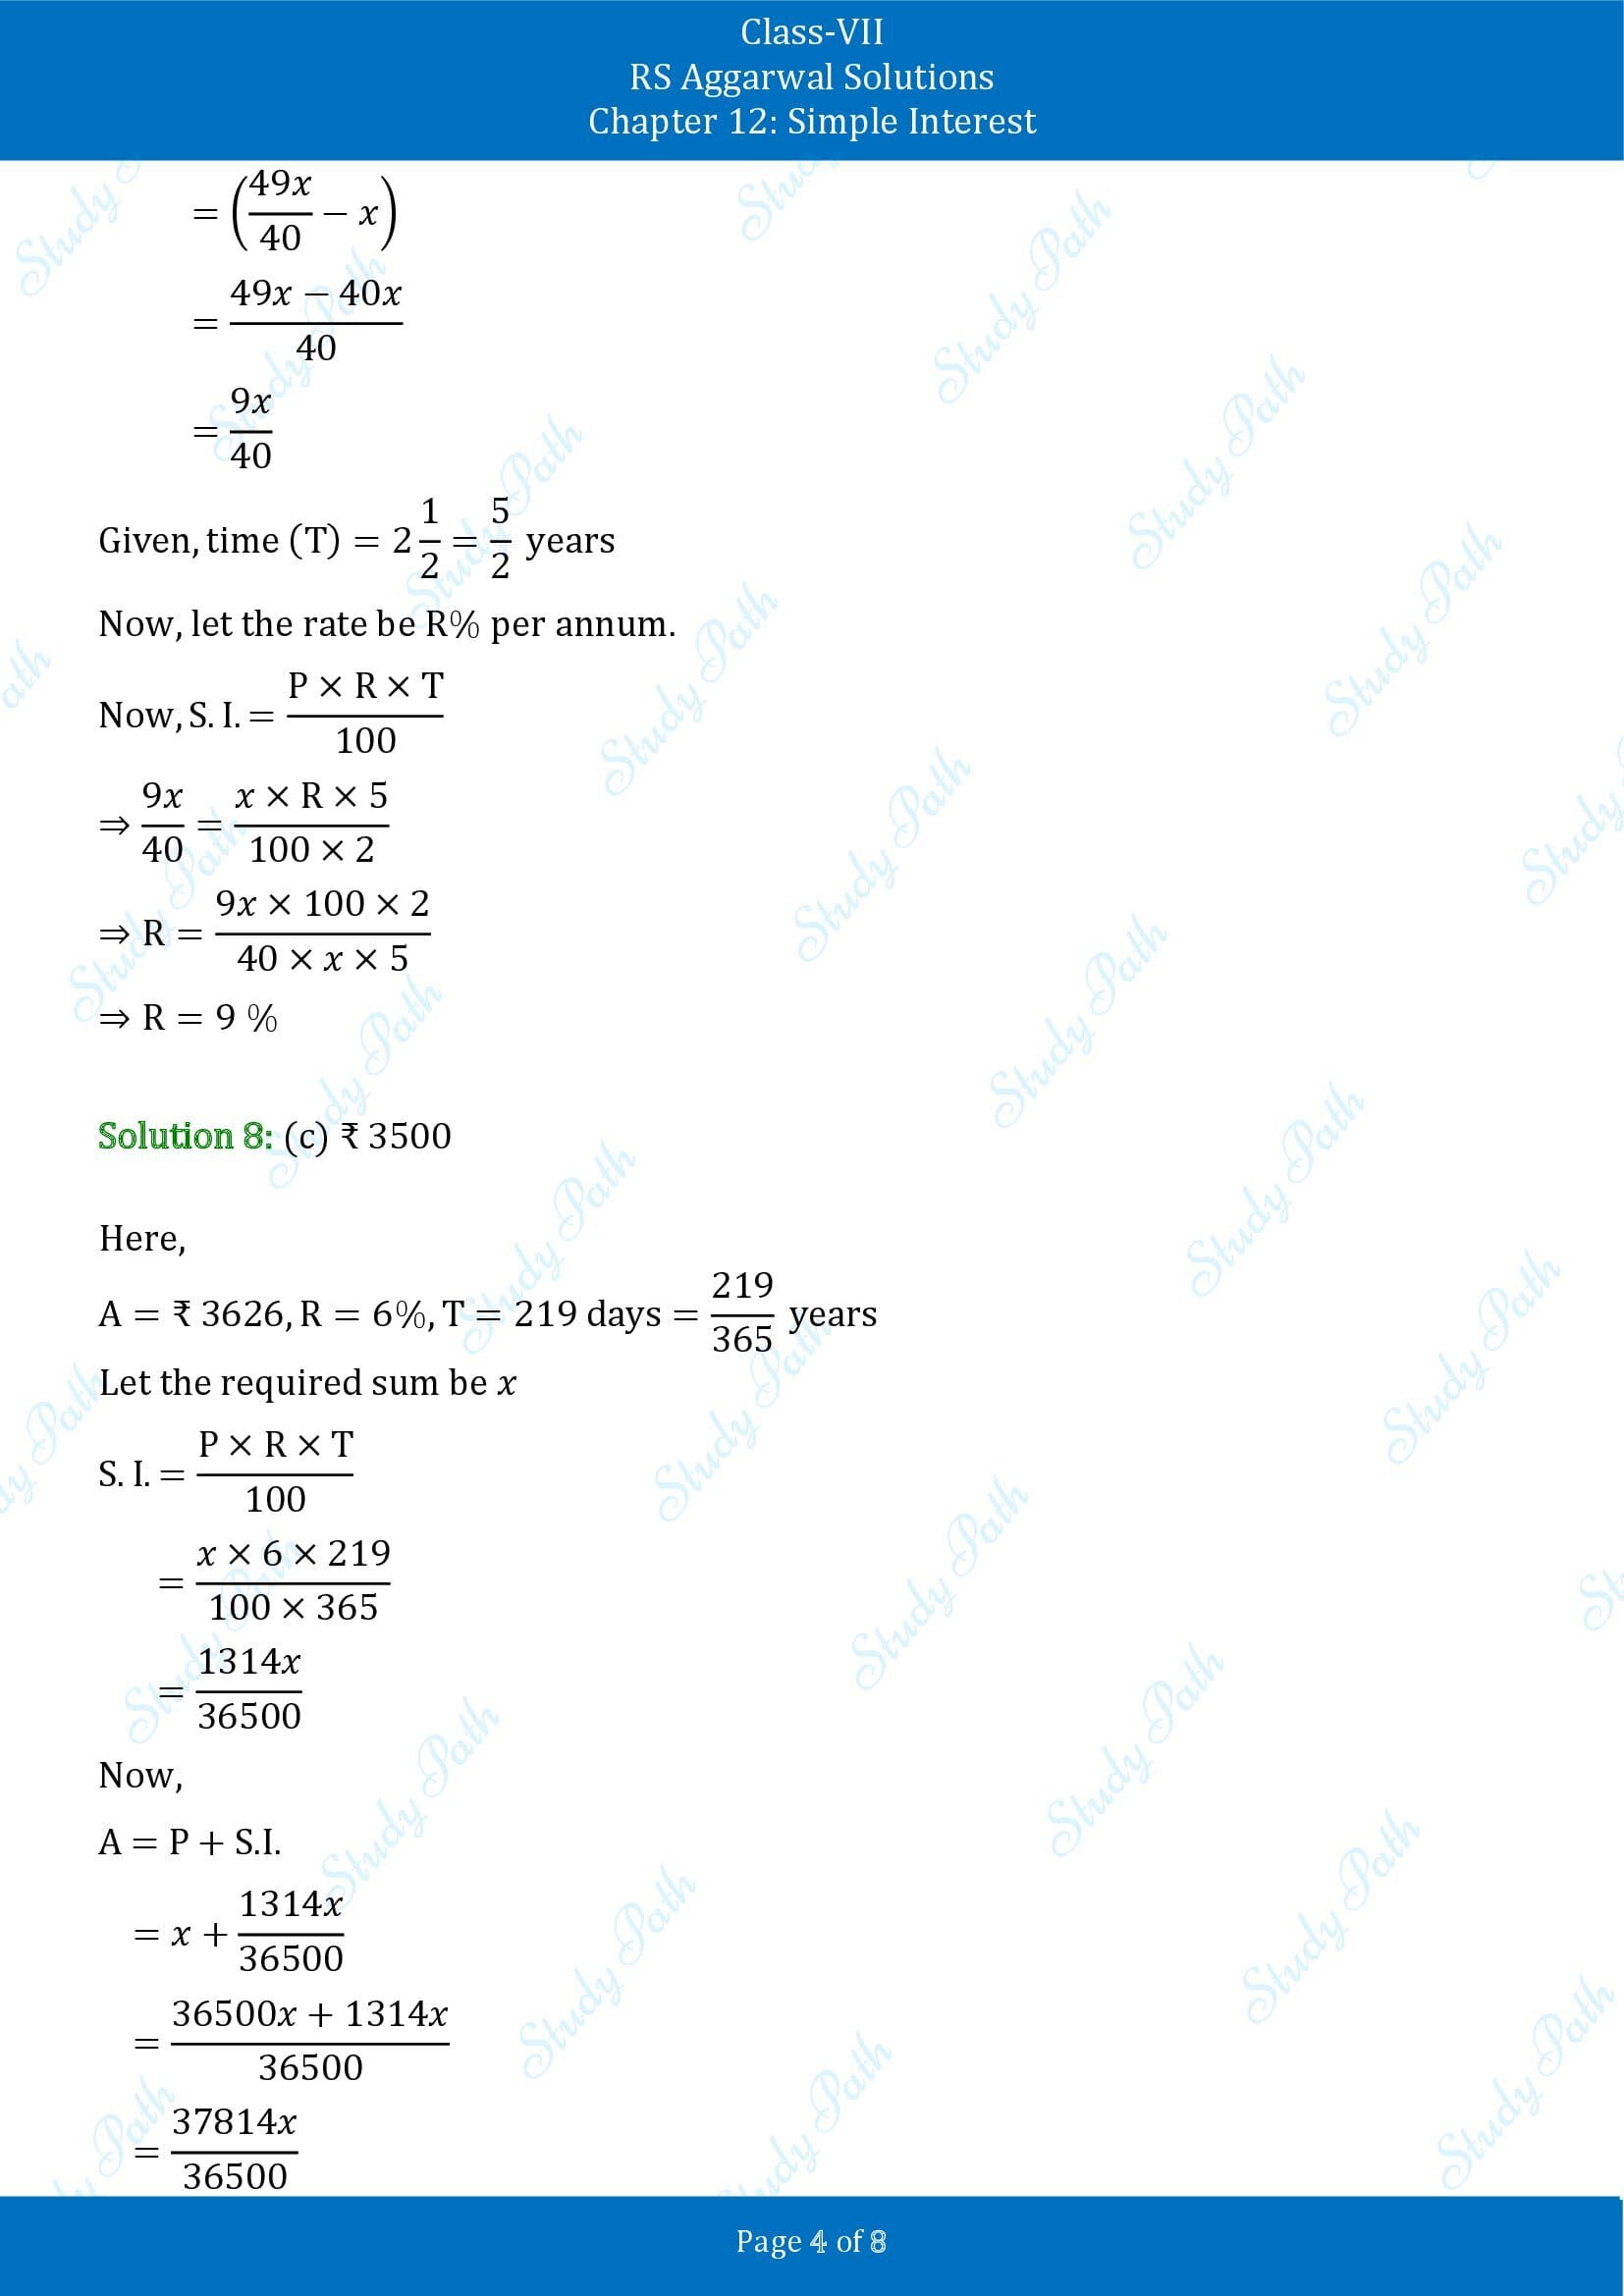 RS Aggarwal Solutions Class 7 Chapter 12 Simple Interest Test Paper 00004